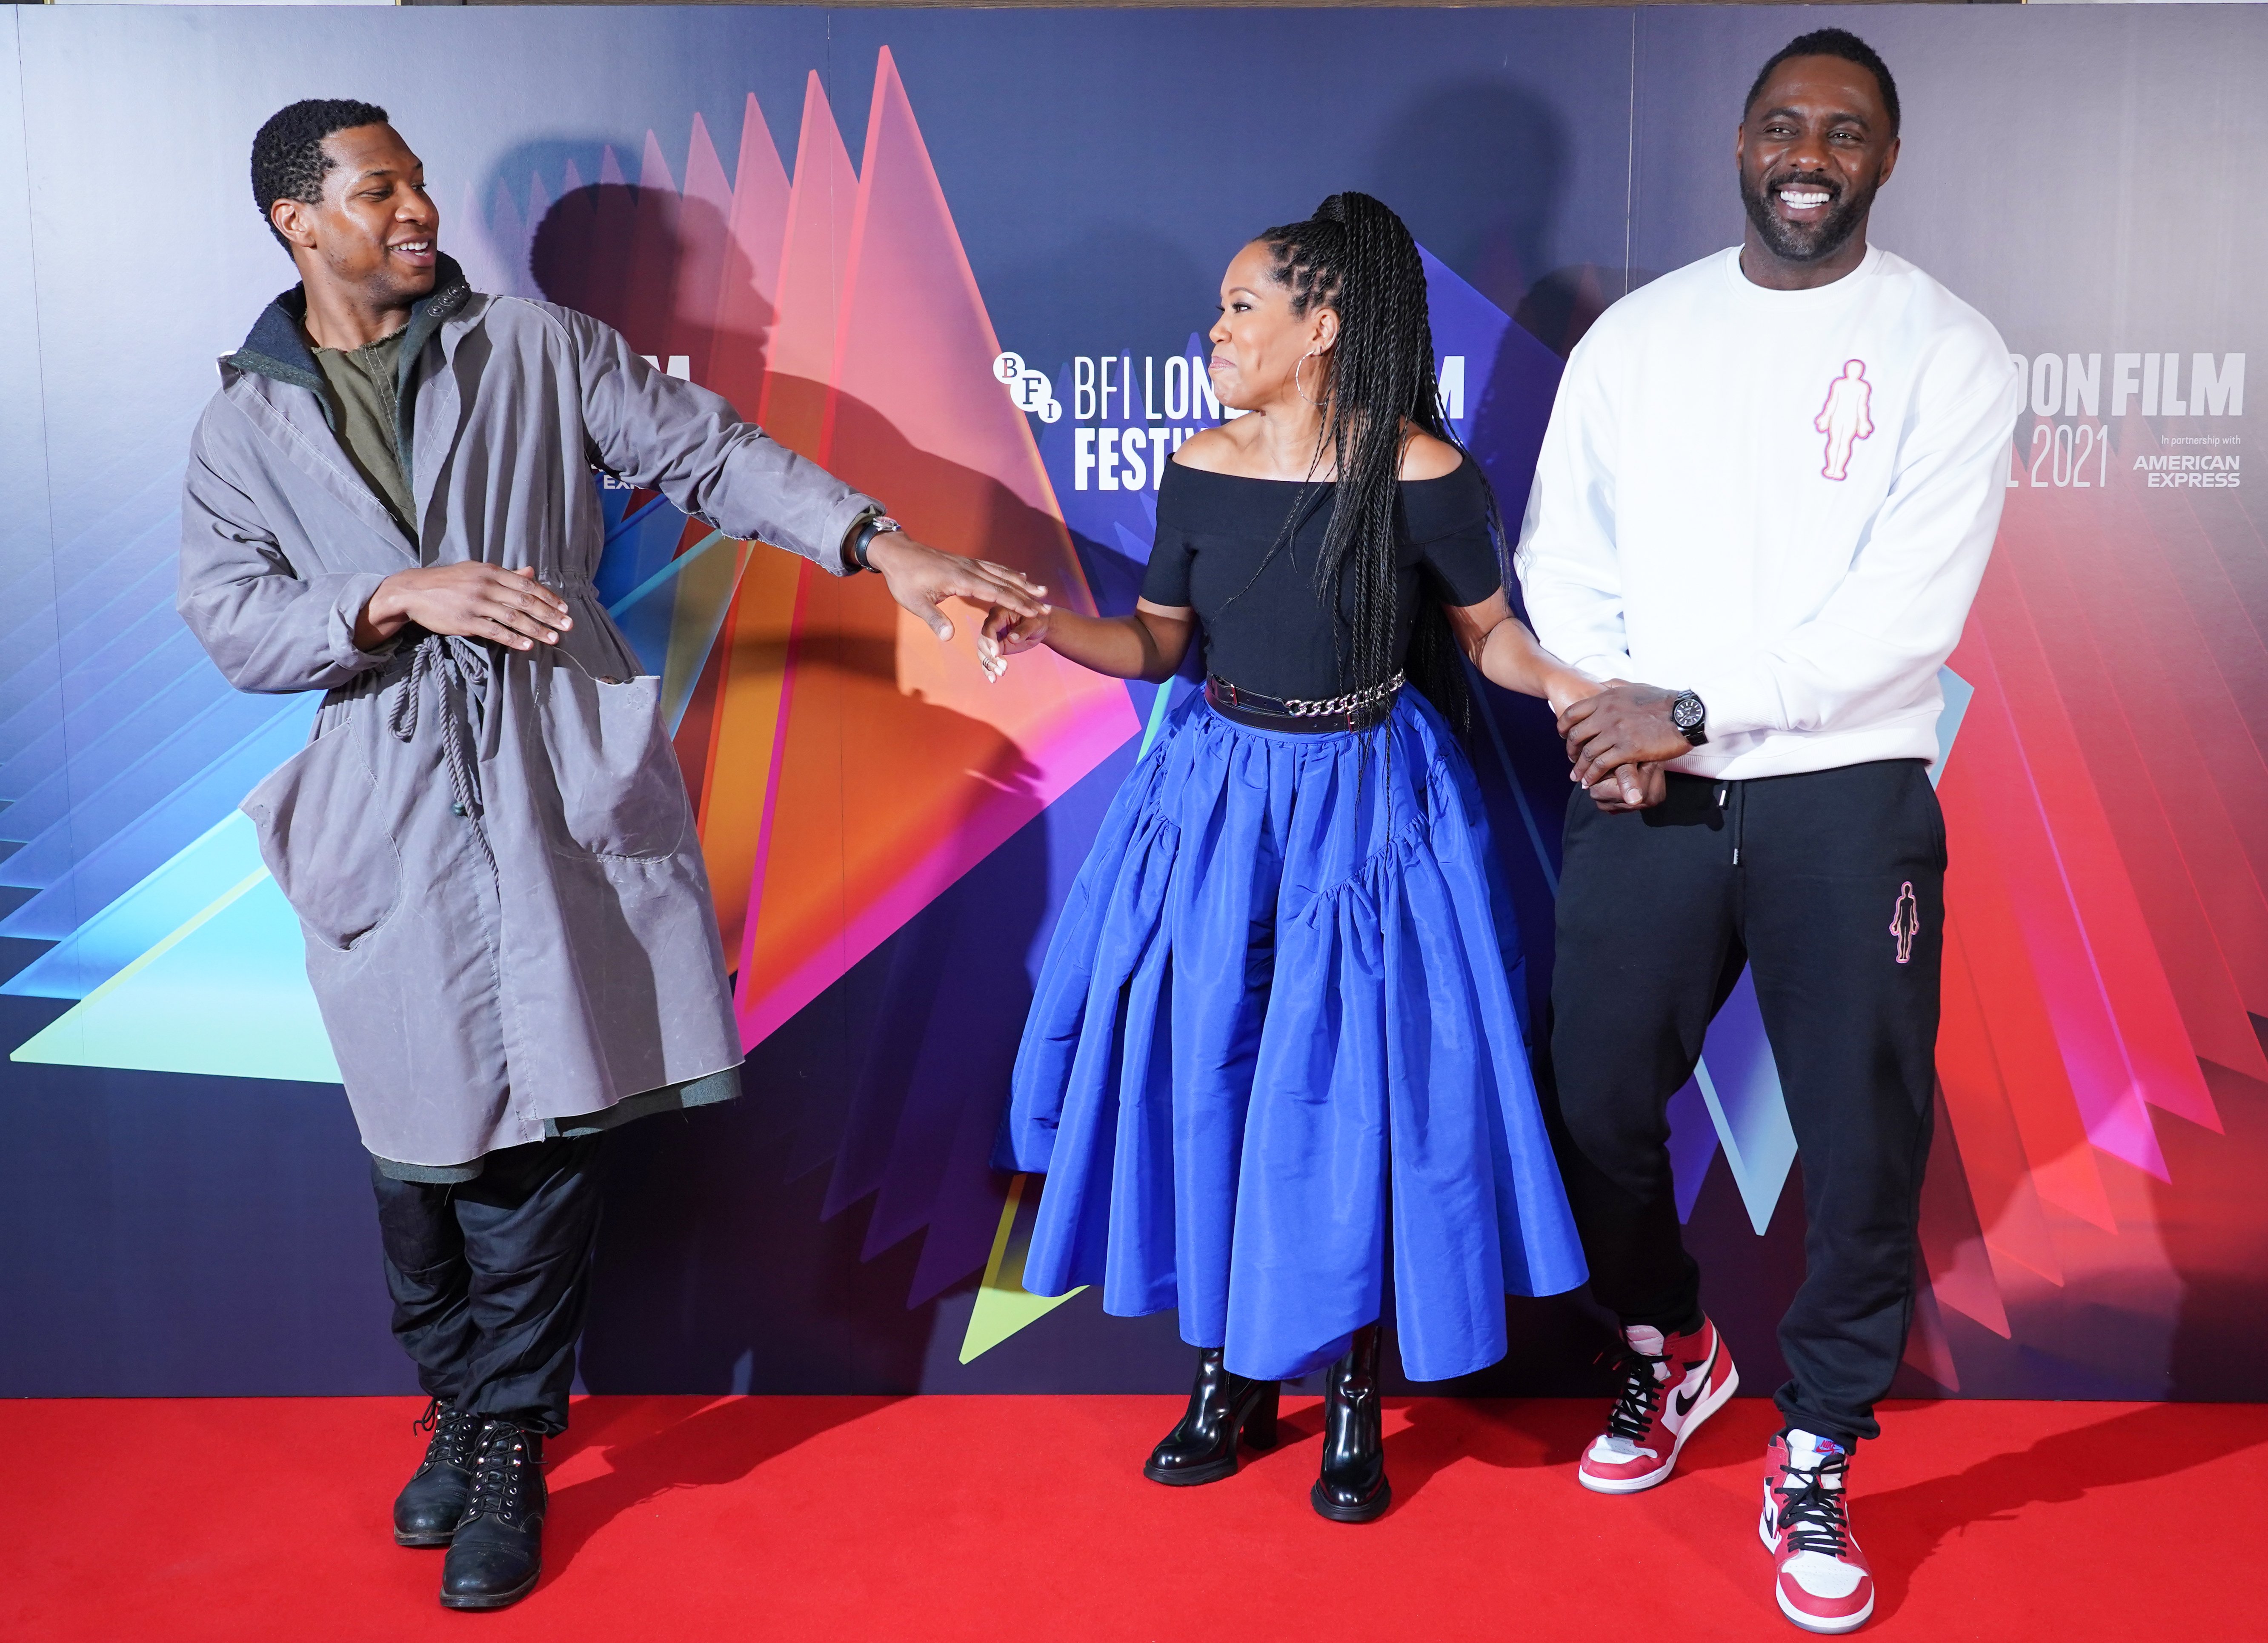 Jonathan Majors, Regina King and Idris Elba at "The Harder They Fall" press conference at the Mayfair Hotel in London, during the BFI London Film Festival, on Wednesday, October 6, 2021. | Source: Getty Images